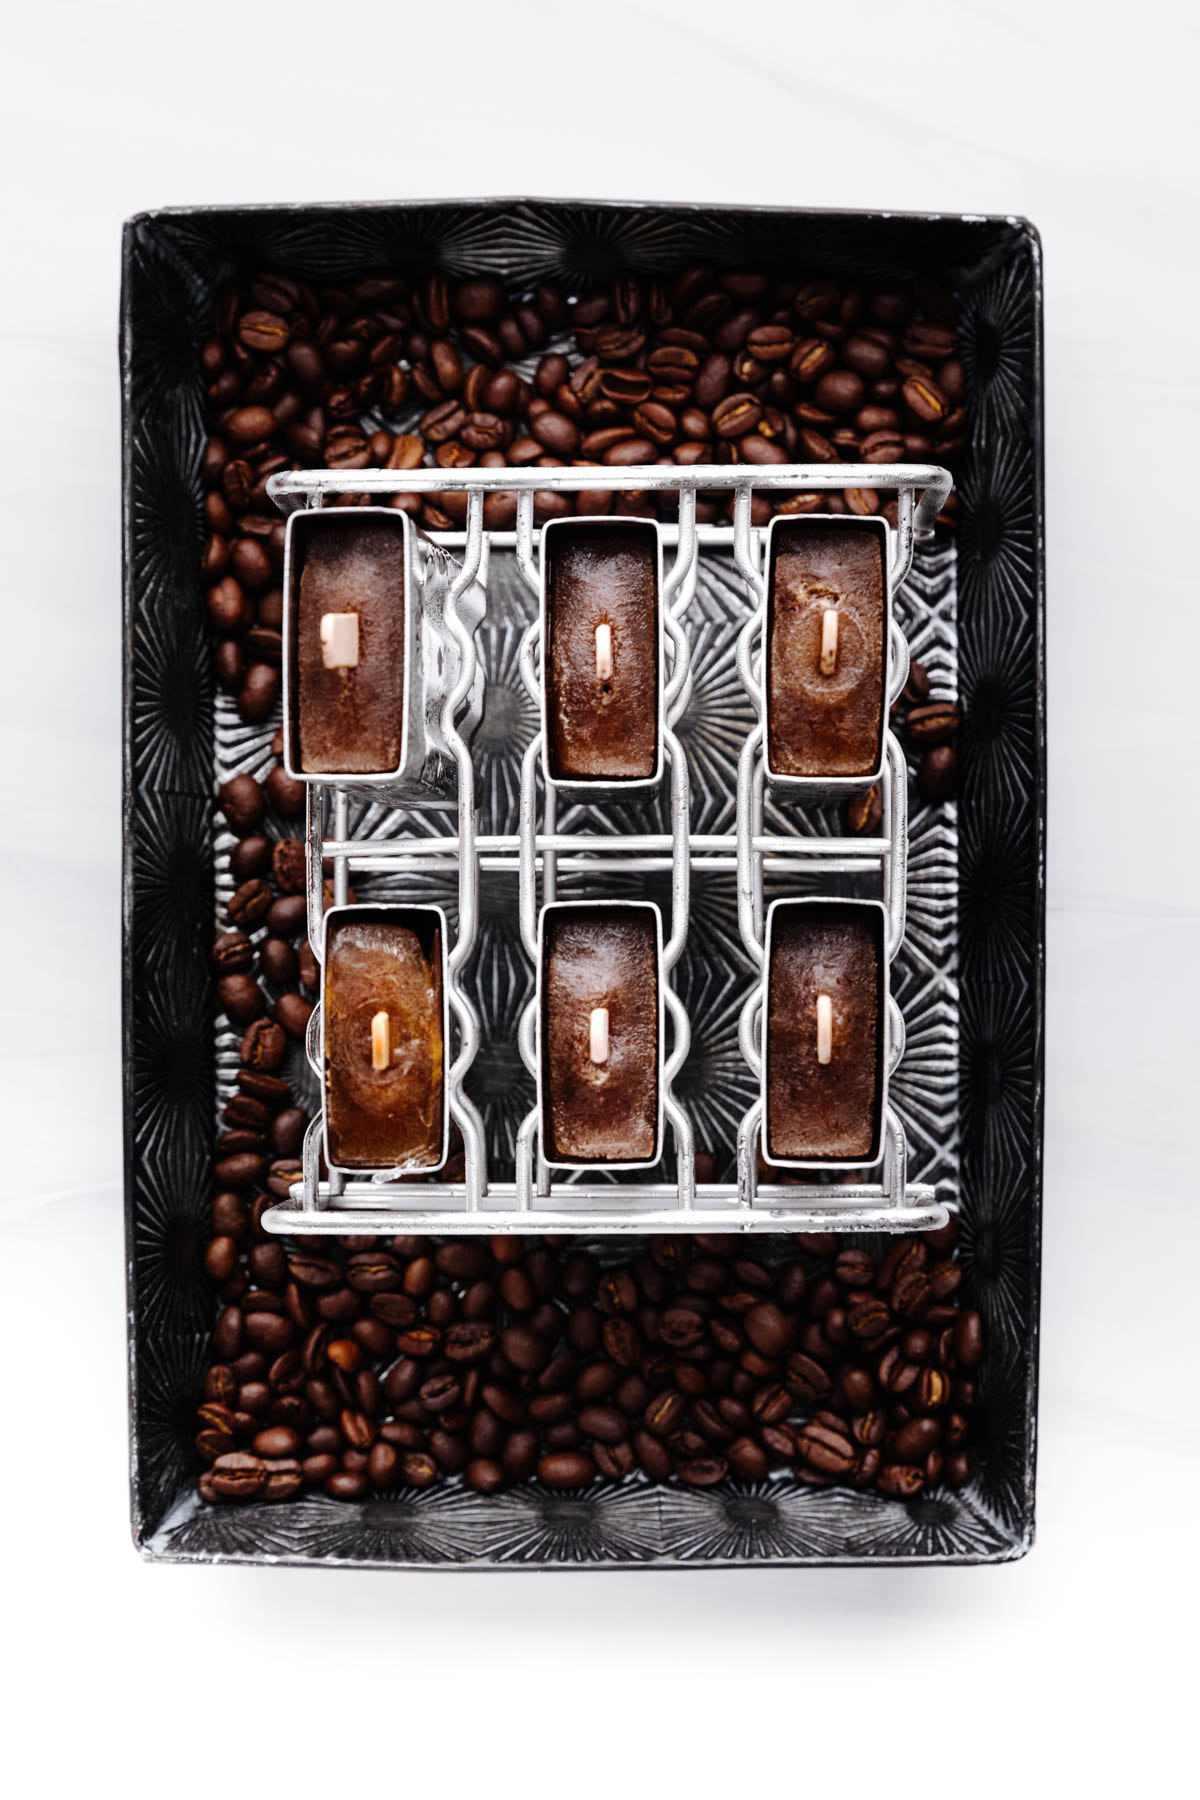 Frozen stainless steel popsicle molds with wooden popsicle sticks in it on a backdrop of coffee beans